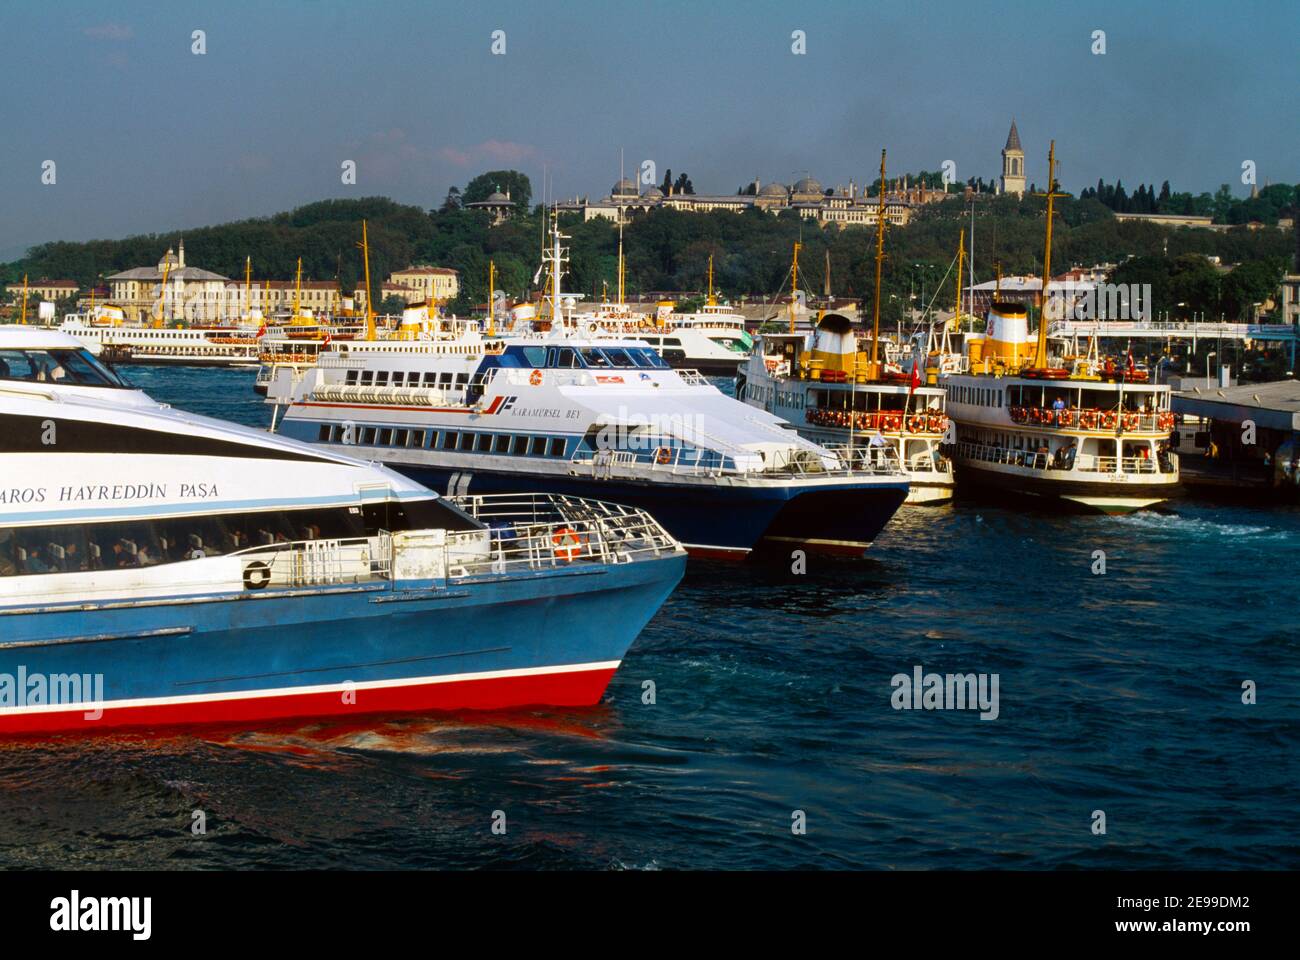 Istanbul Turquie passagers Ferries Banque D'Images